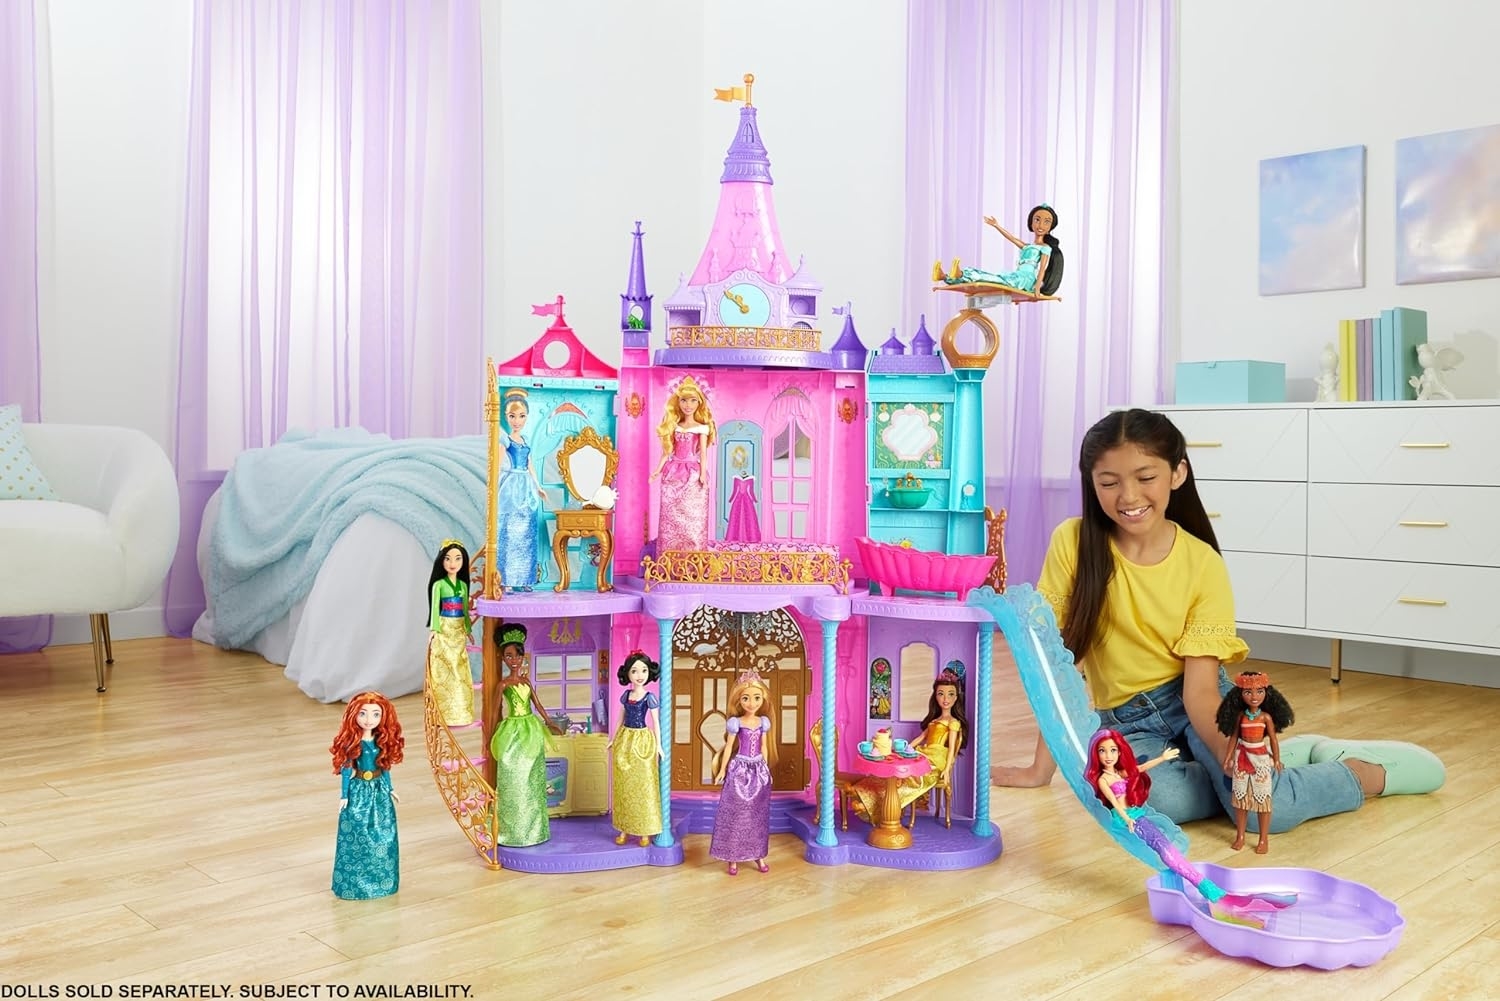 A child plays with a variety of dolls, including figures from Disney's Frozen, in an elaborate toy castle playset